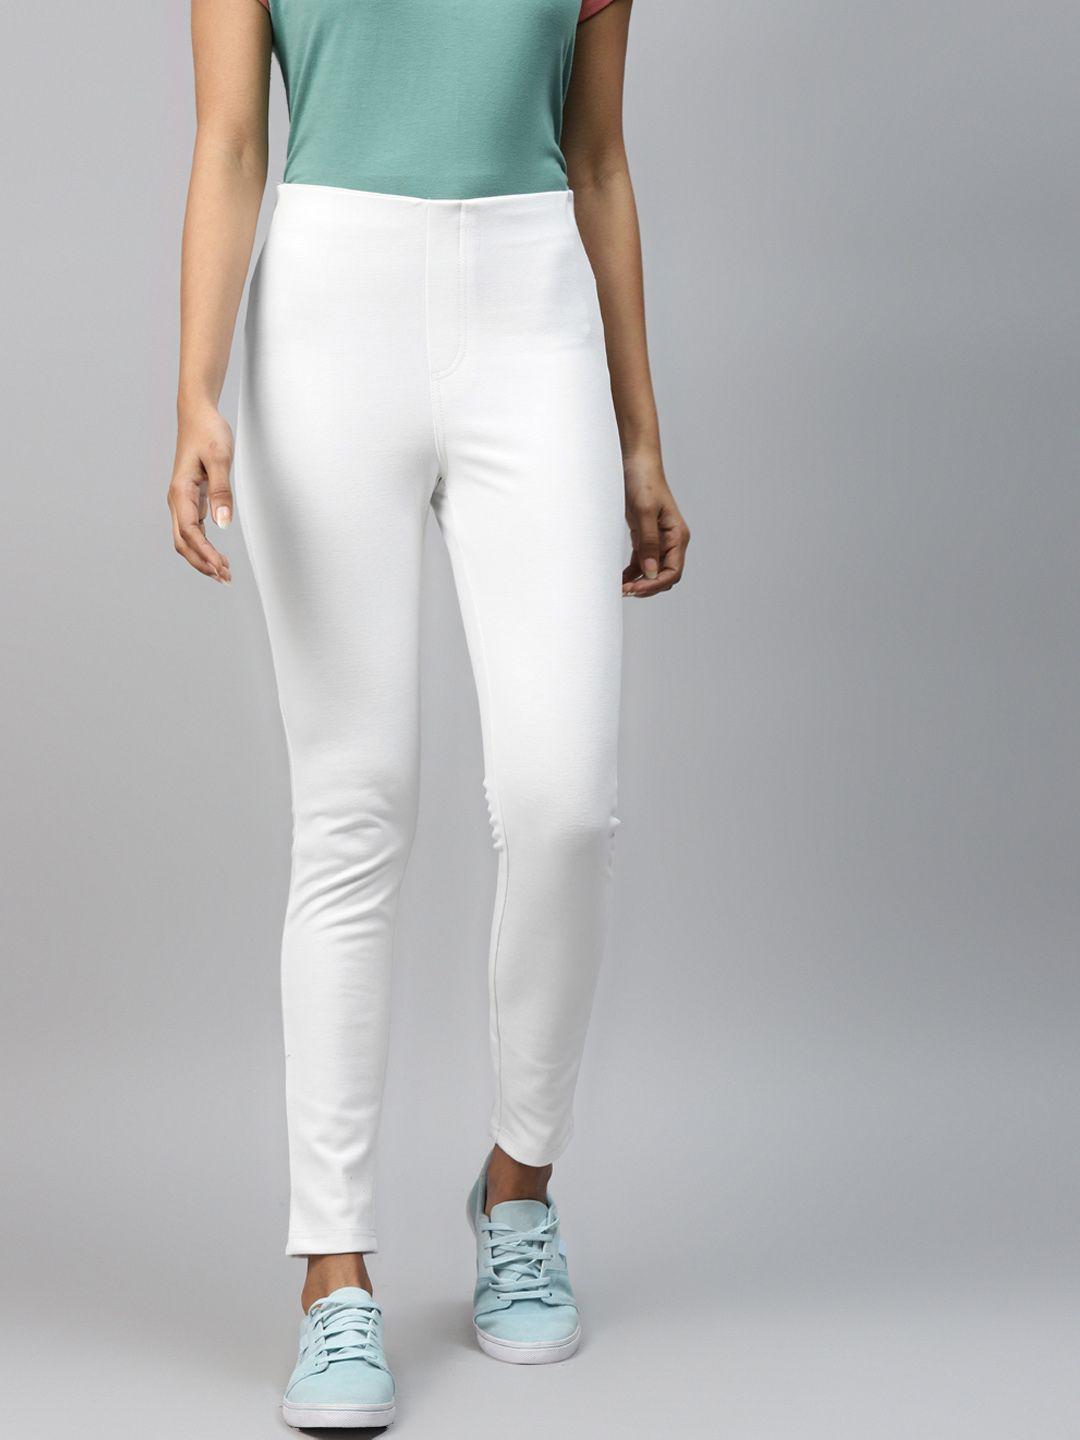 hubberholme-women-white-solid-skiny-fit-cropped-jeggings